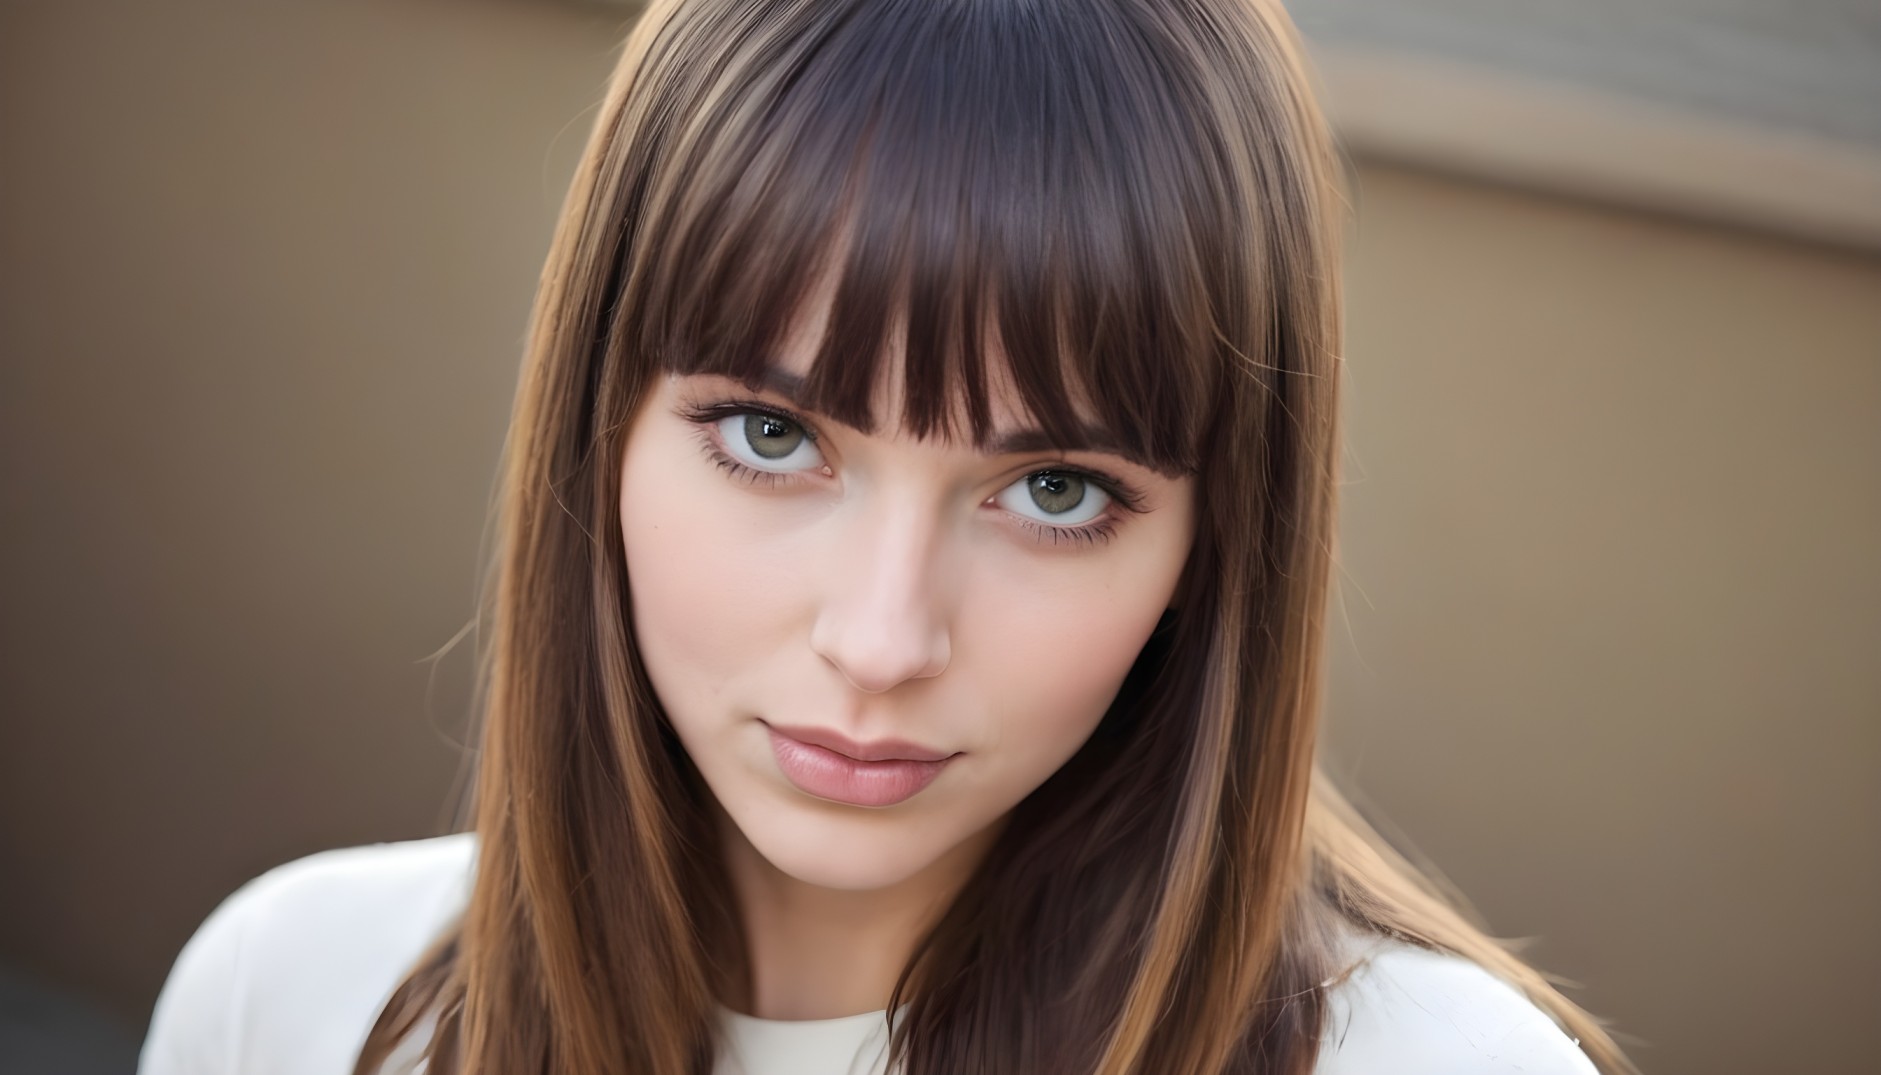 Good-Looking Attractive Bangs for Round Faces